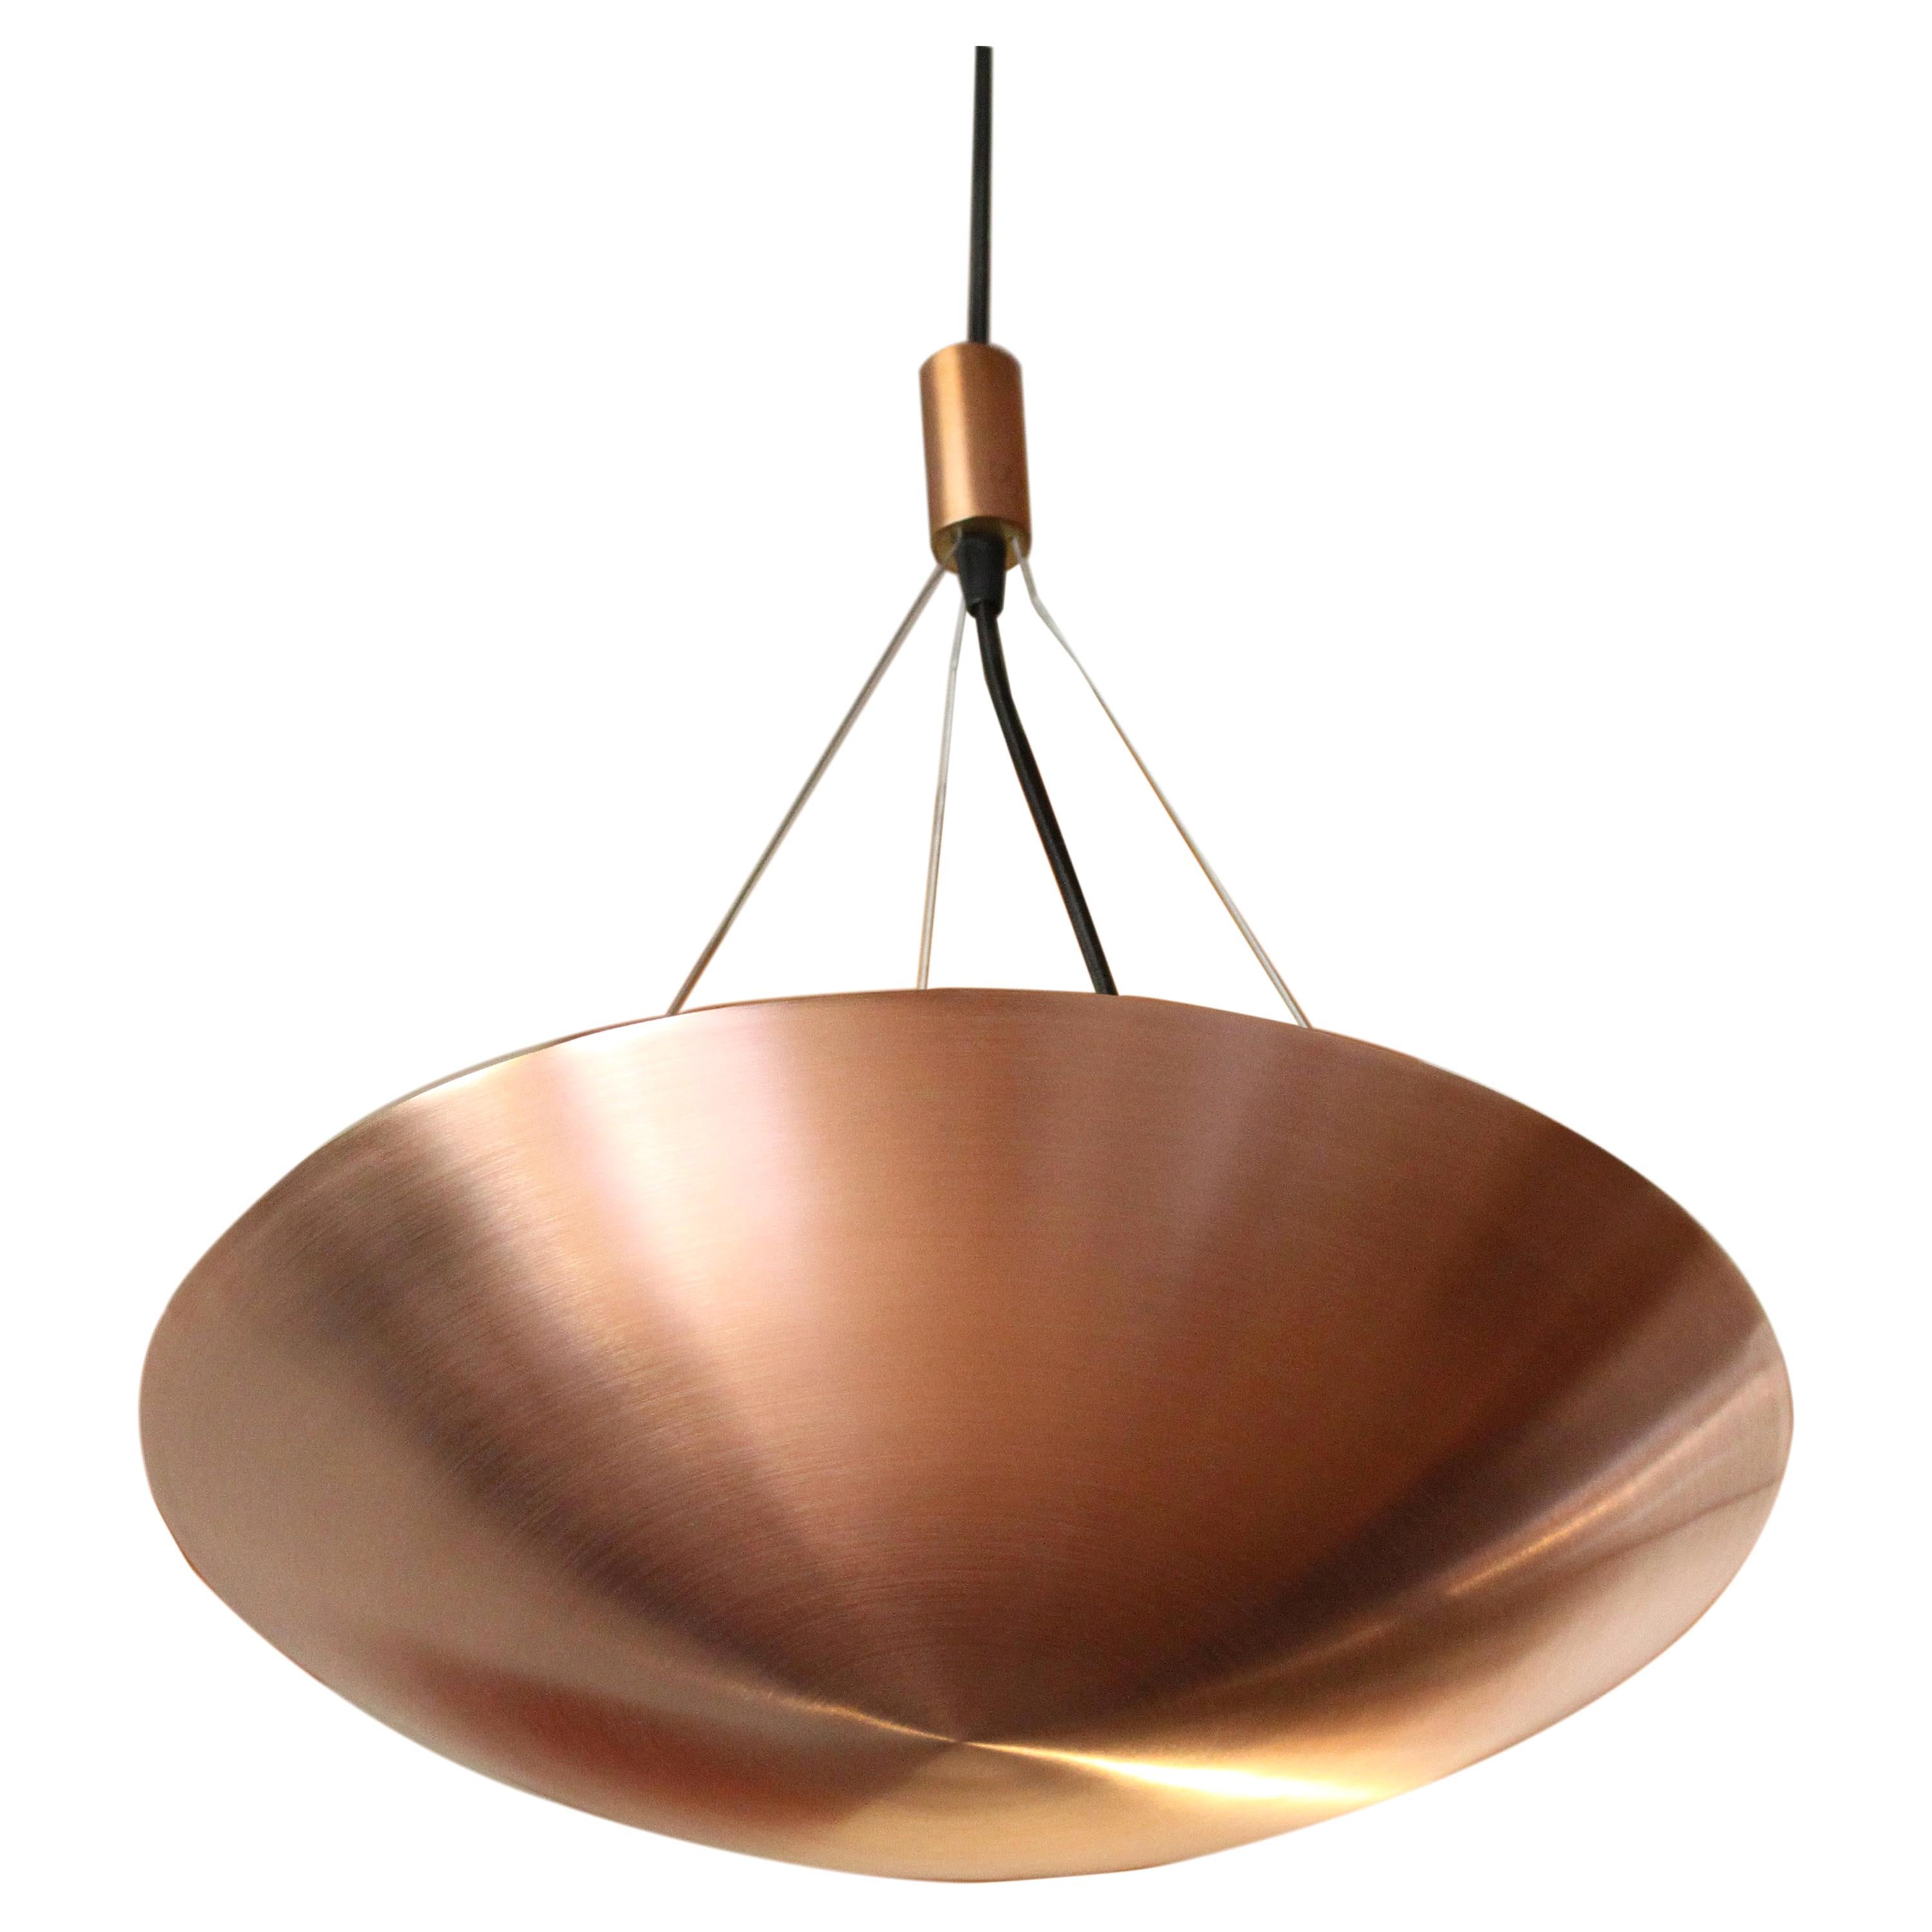 Plato Arriba 40 Pendant Lamp, Maria Beckmann, Represented by Tuleste Factory For Sale